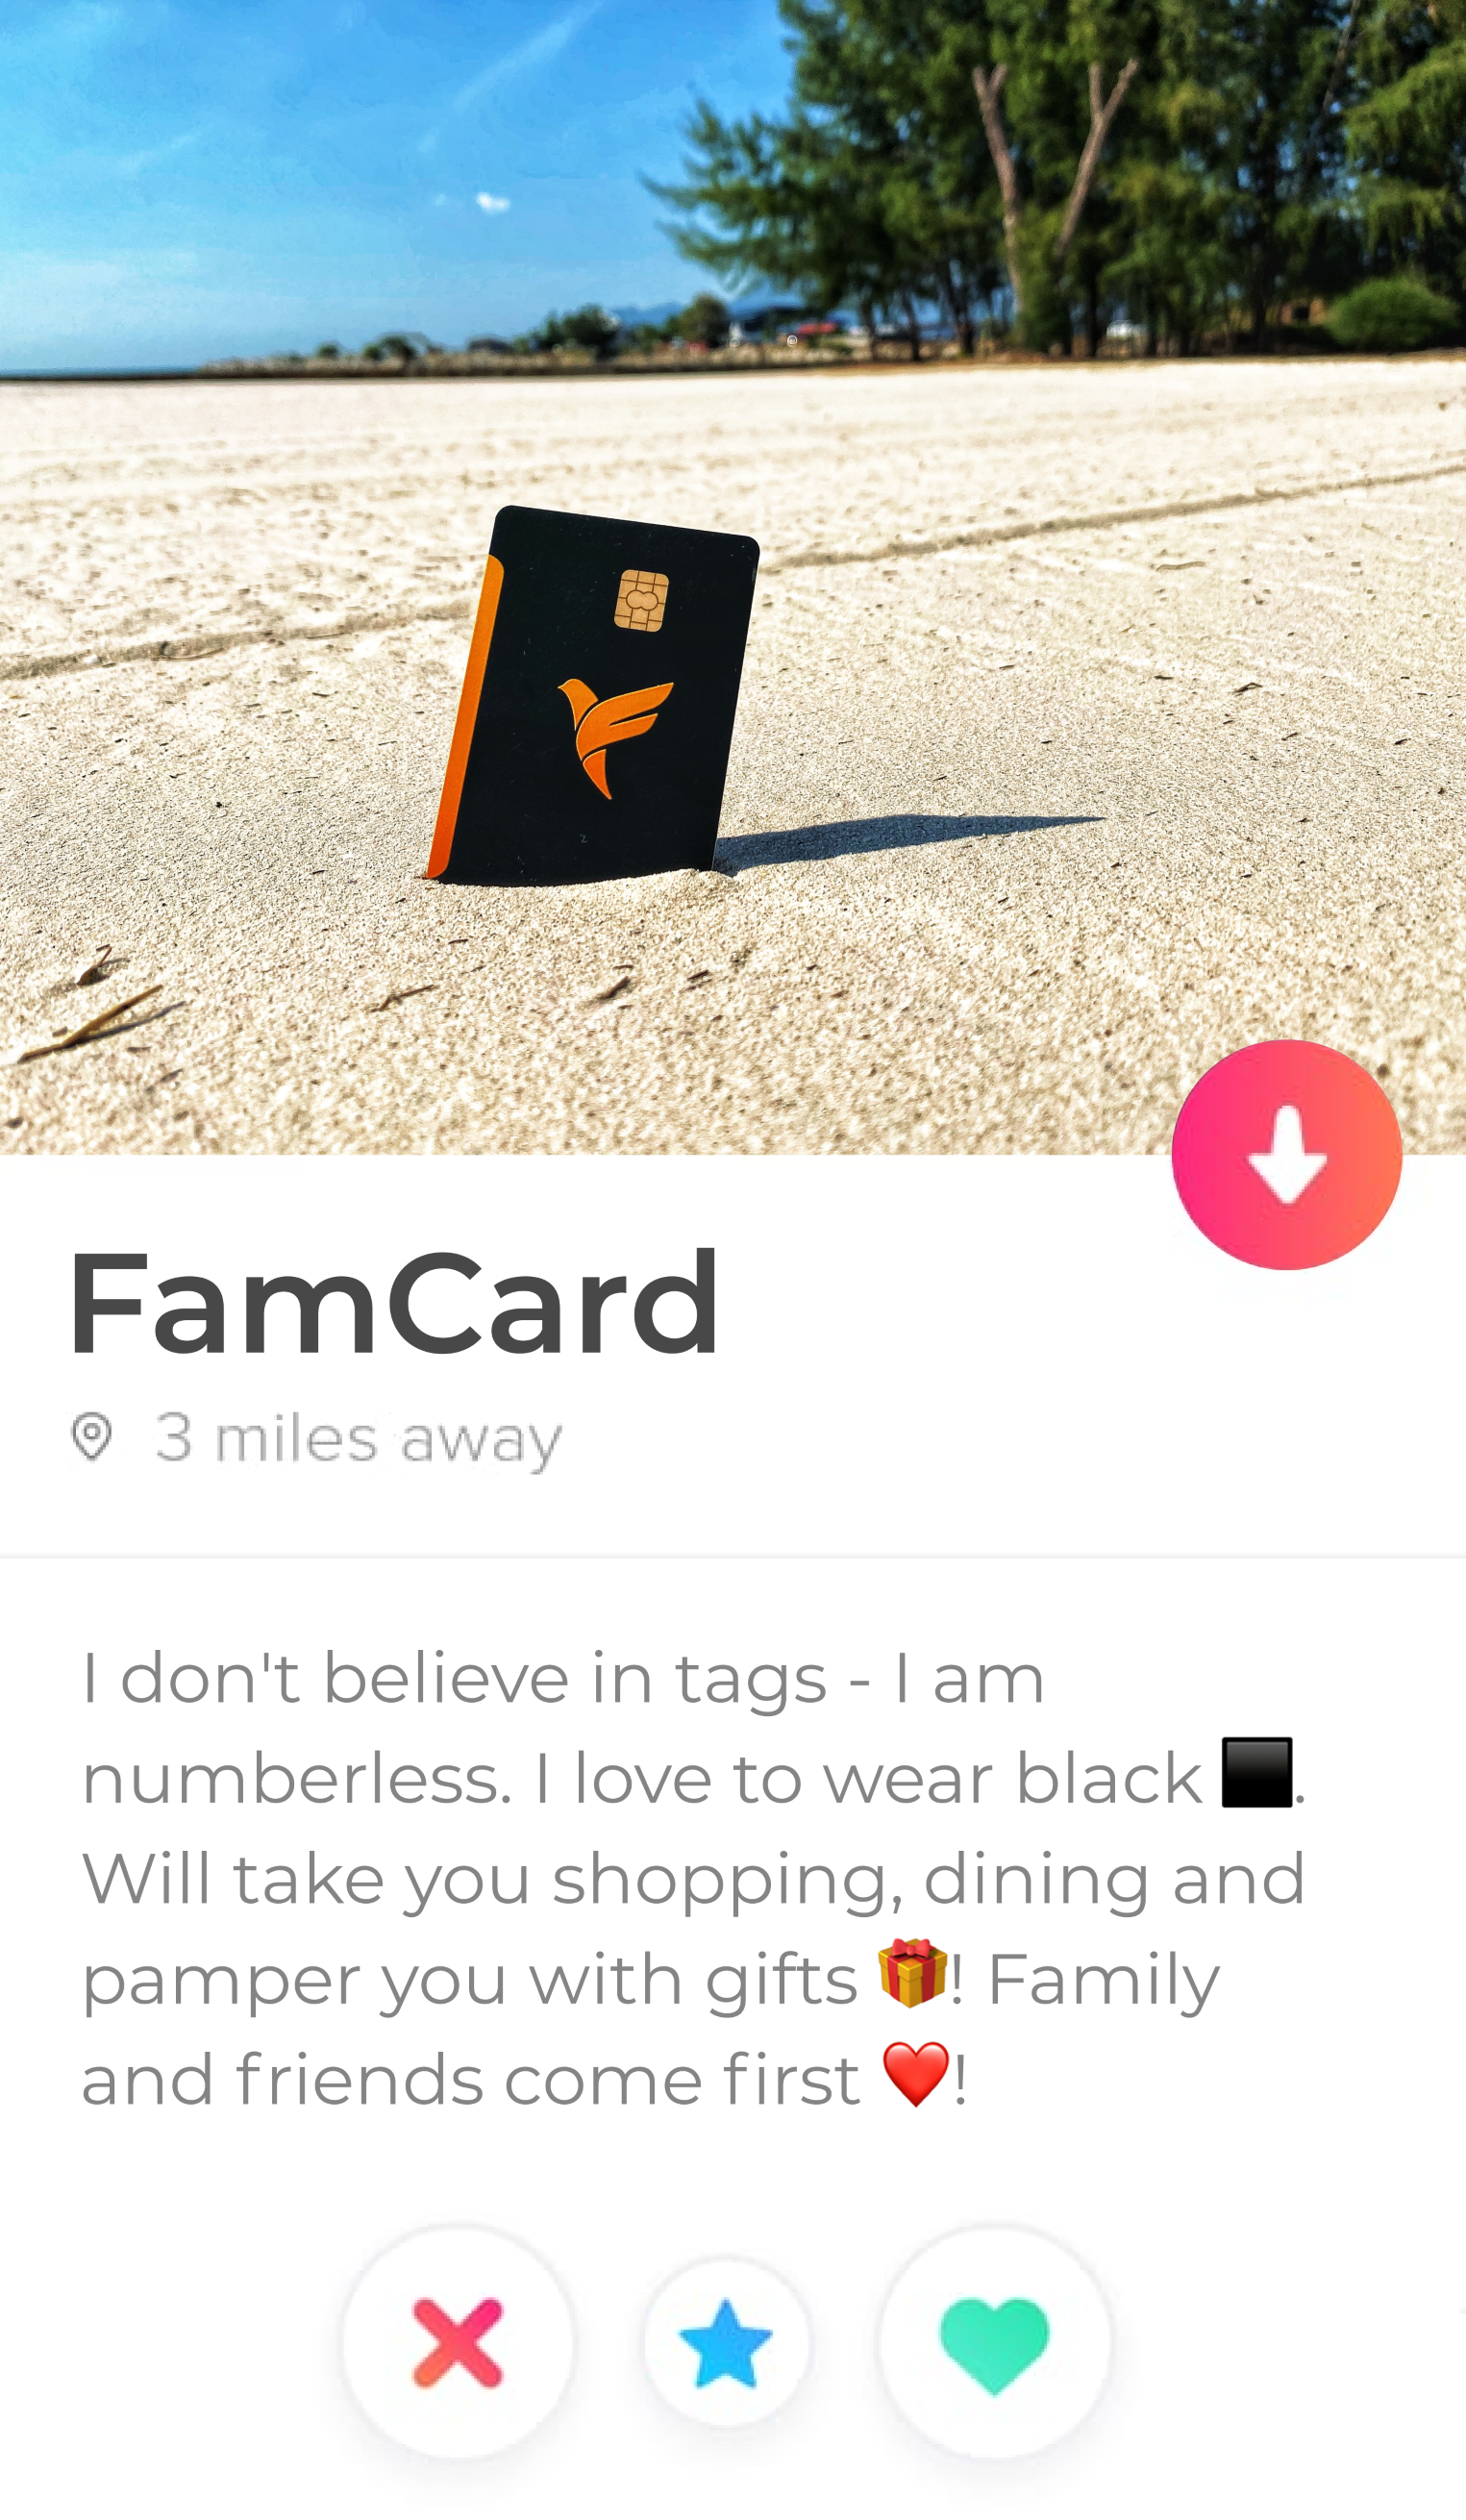 FamCard - your first debit card! - Image 1